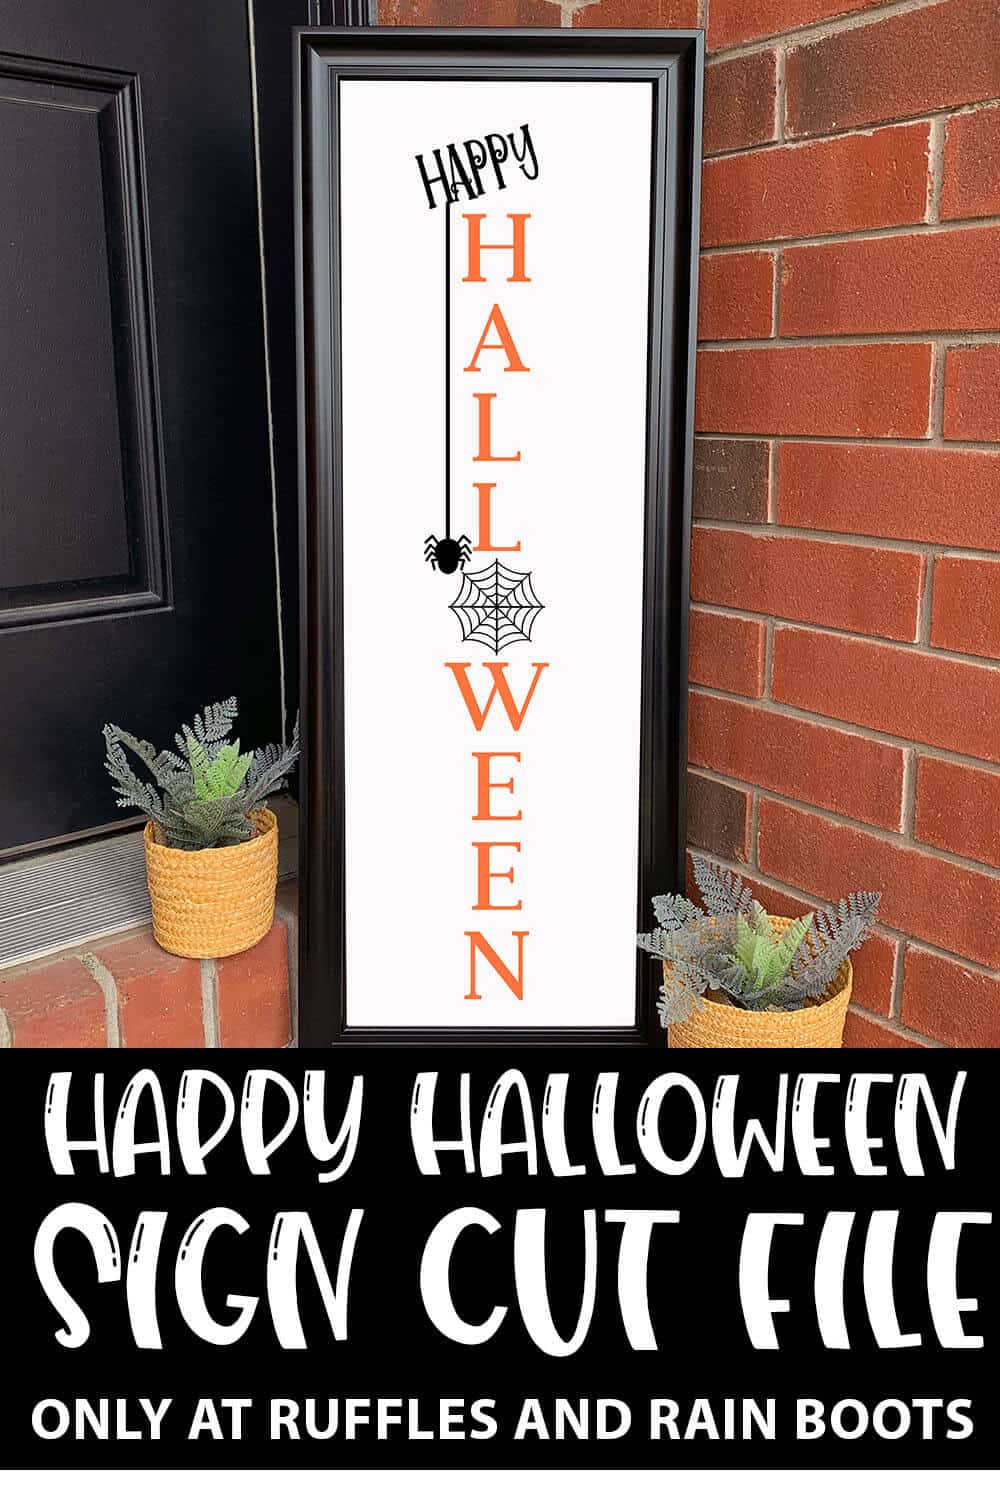 Happy Halloween Vertical Sign SVG file set for cricut or silhouette with text which reads happy halloween sign cut file